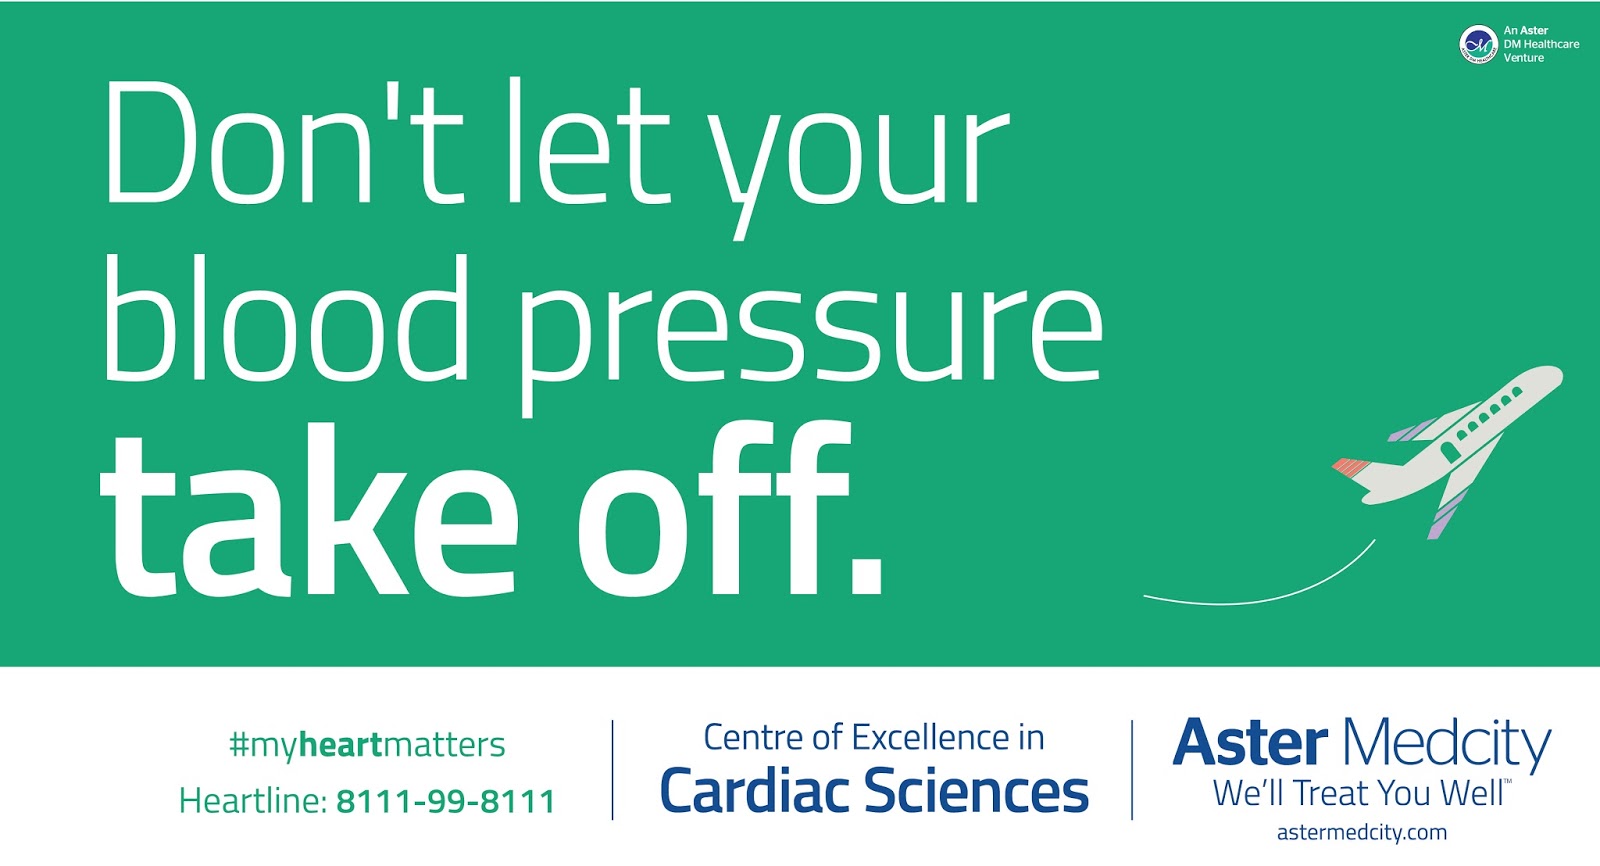 Aster Medcity - Centre of Excellance in Cardiac Science | Print mock-up 1 | Stark Communications Pvt Ltd